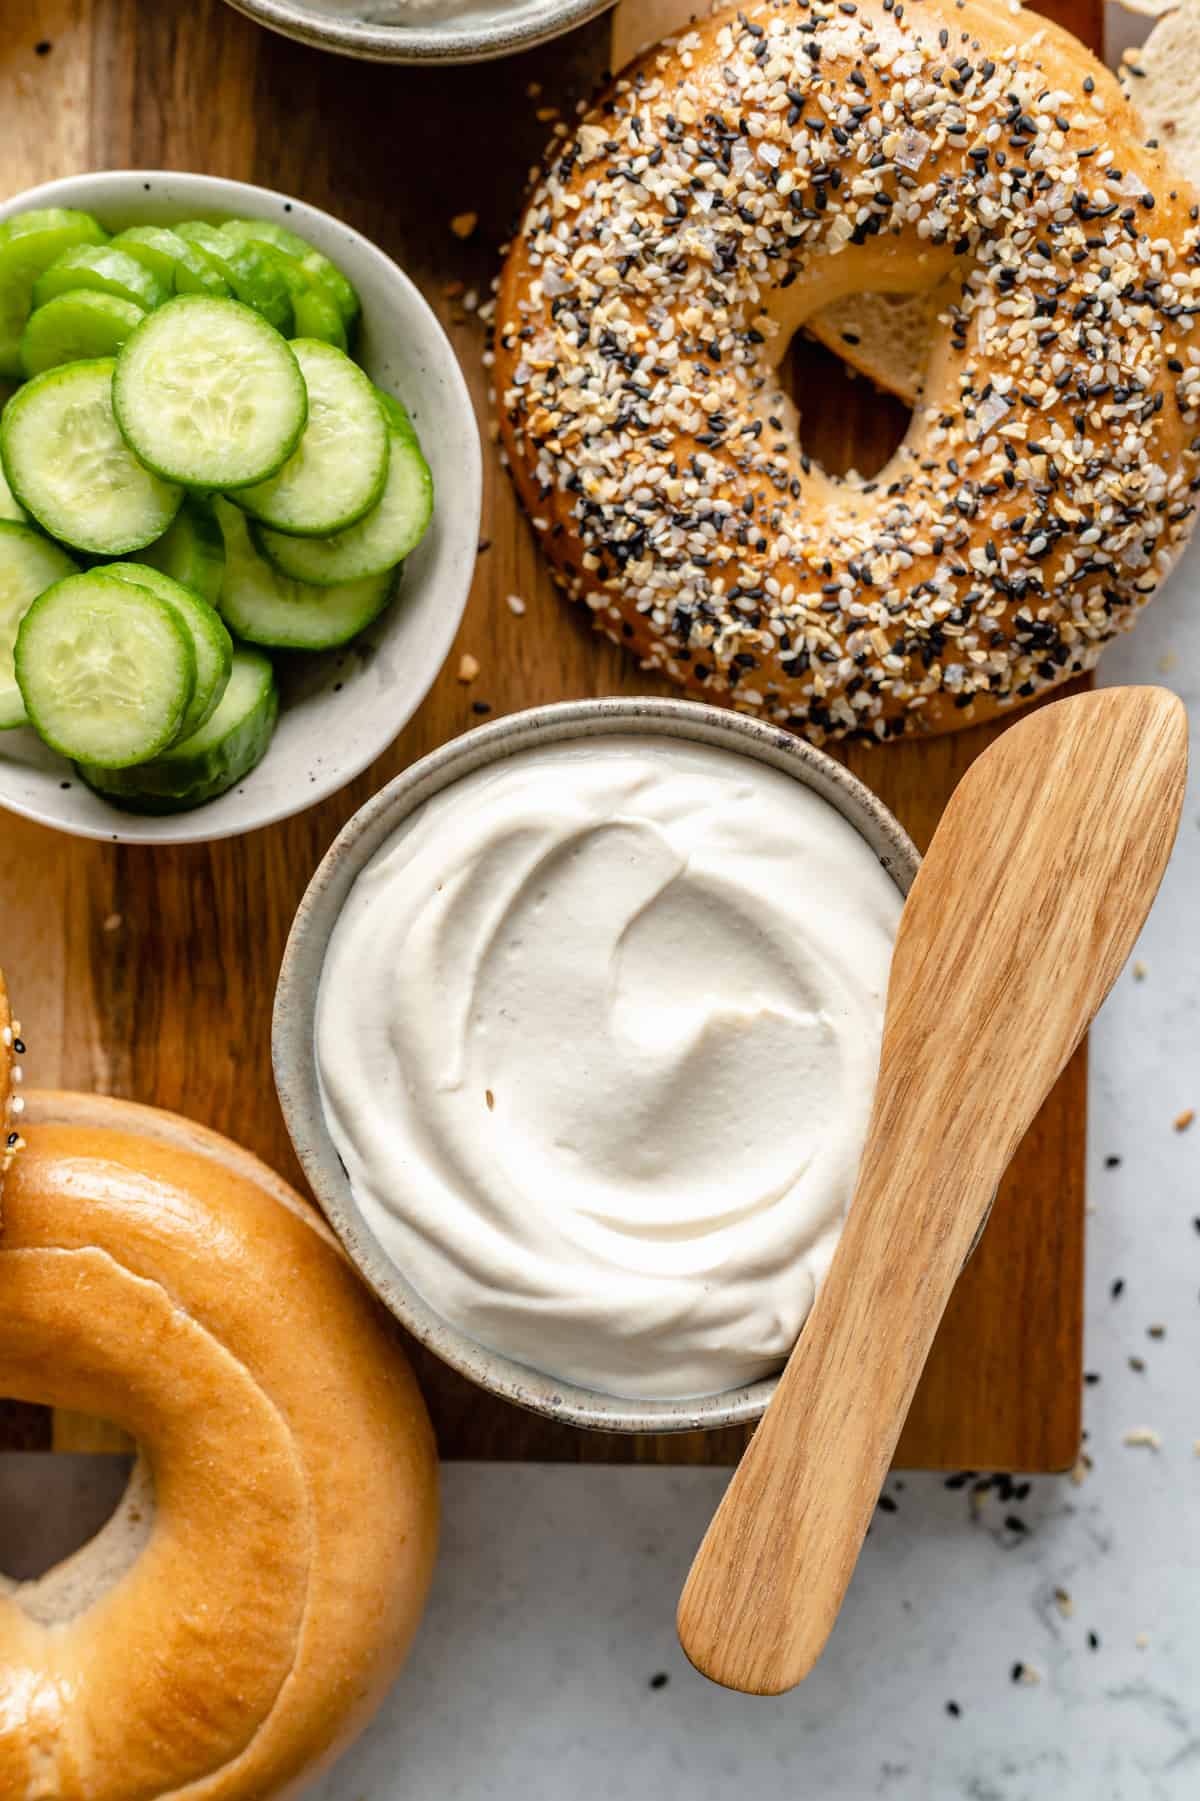 Plain cream cheese with bagels on a cutting board.